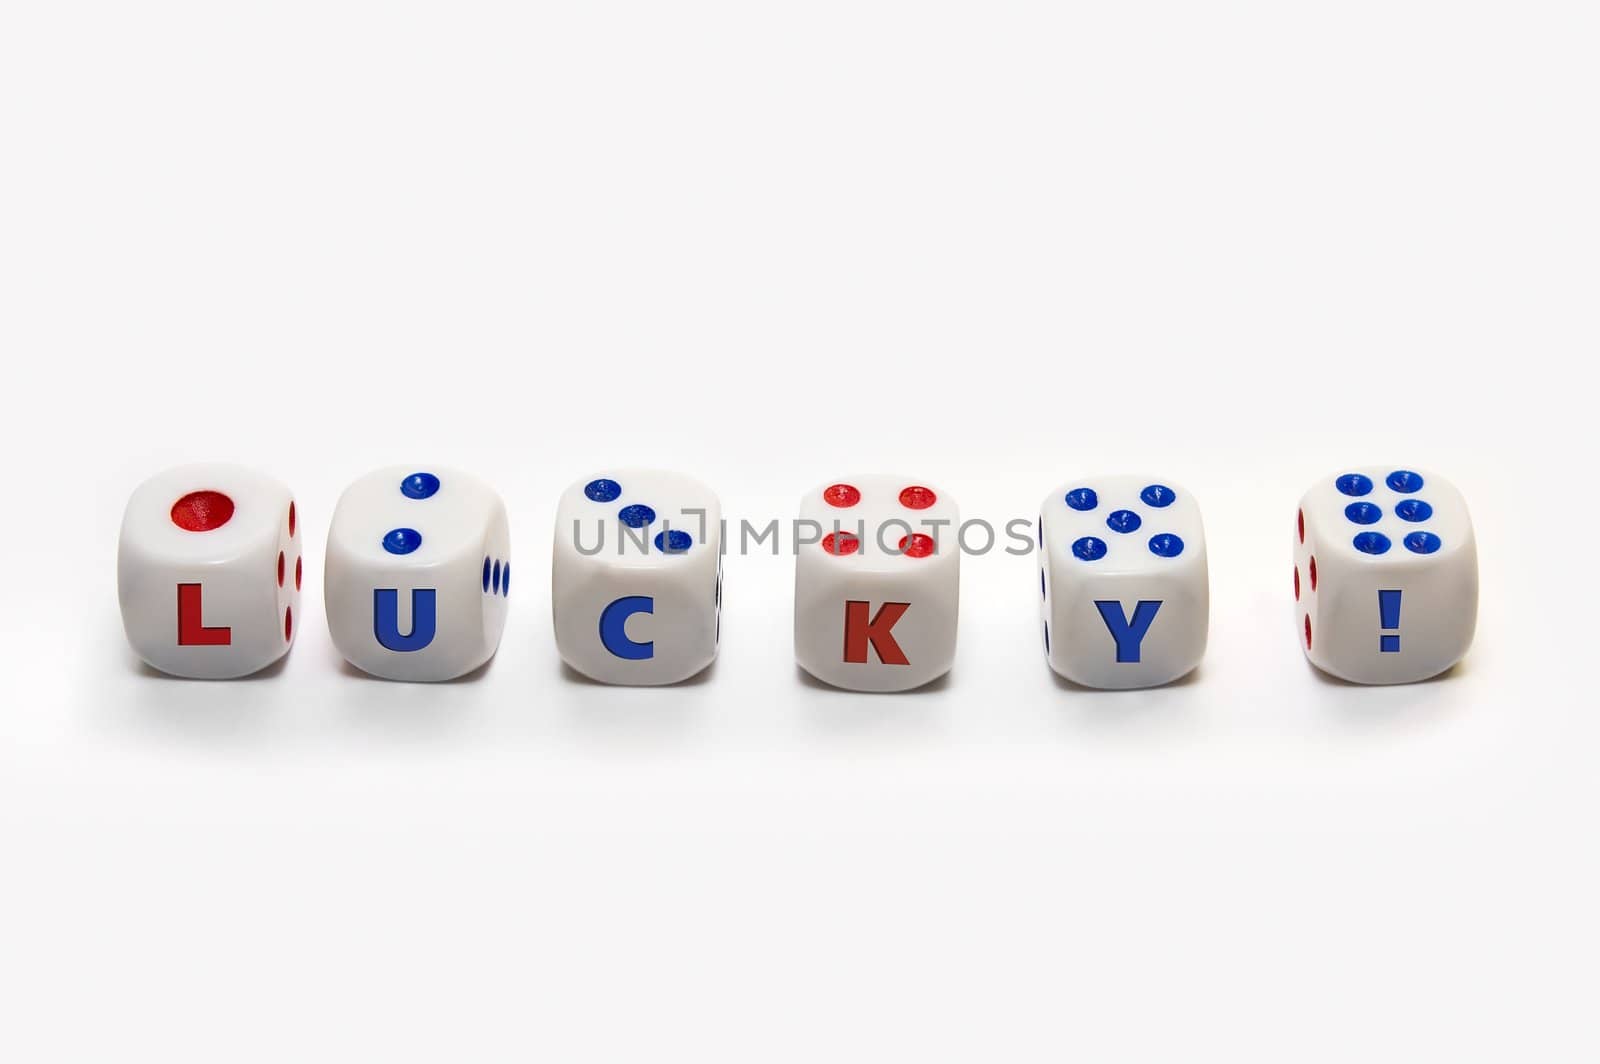 Lucky dices by rusak